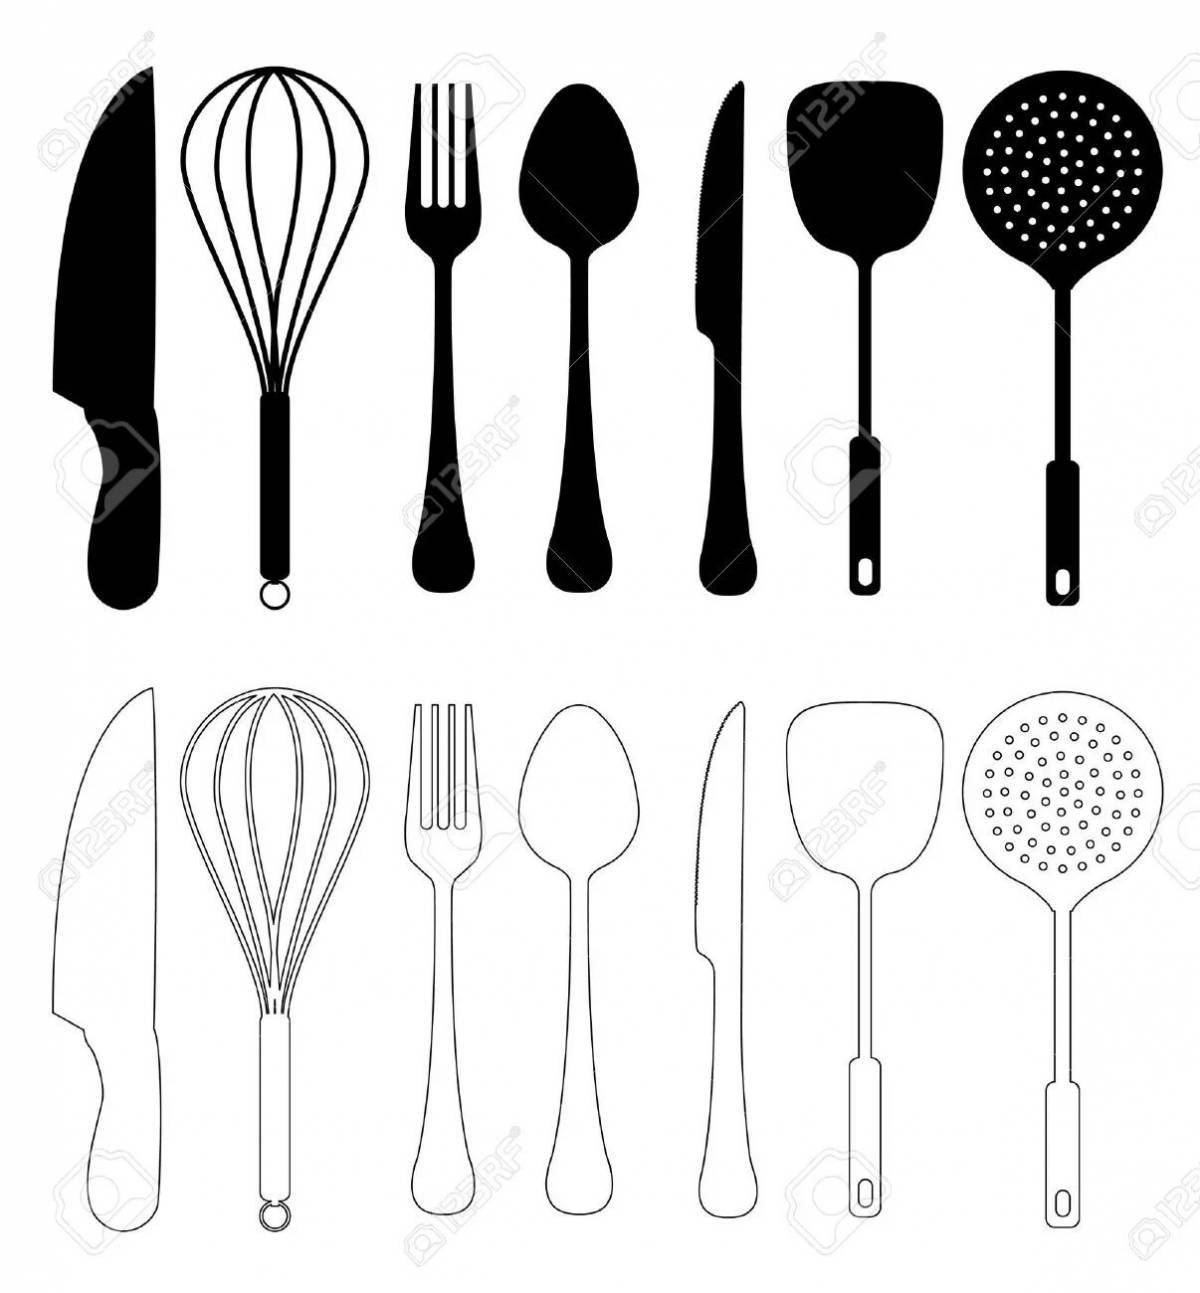 Fabulous coloring pages of kitchen utensils for babies